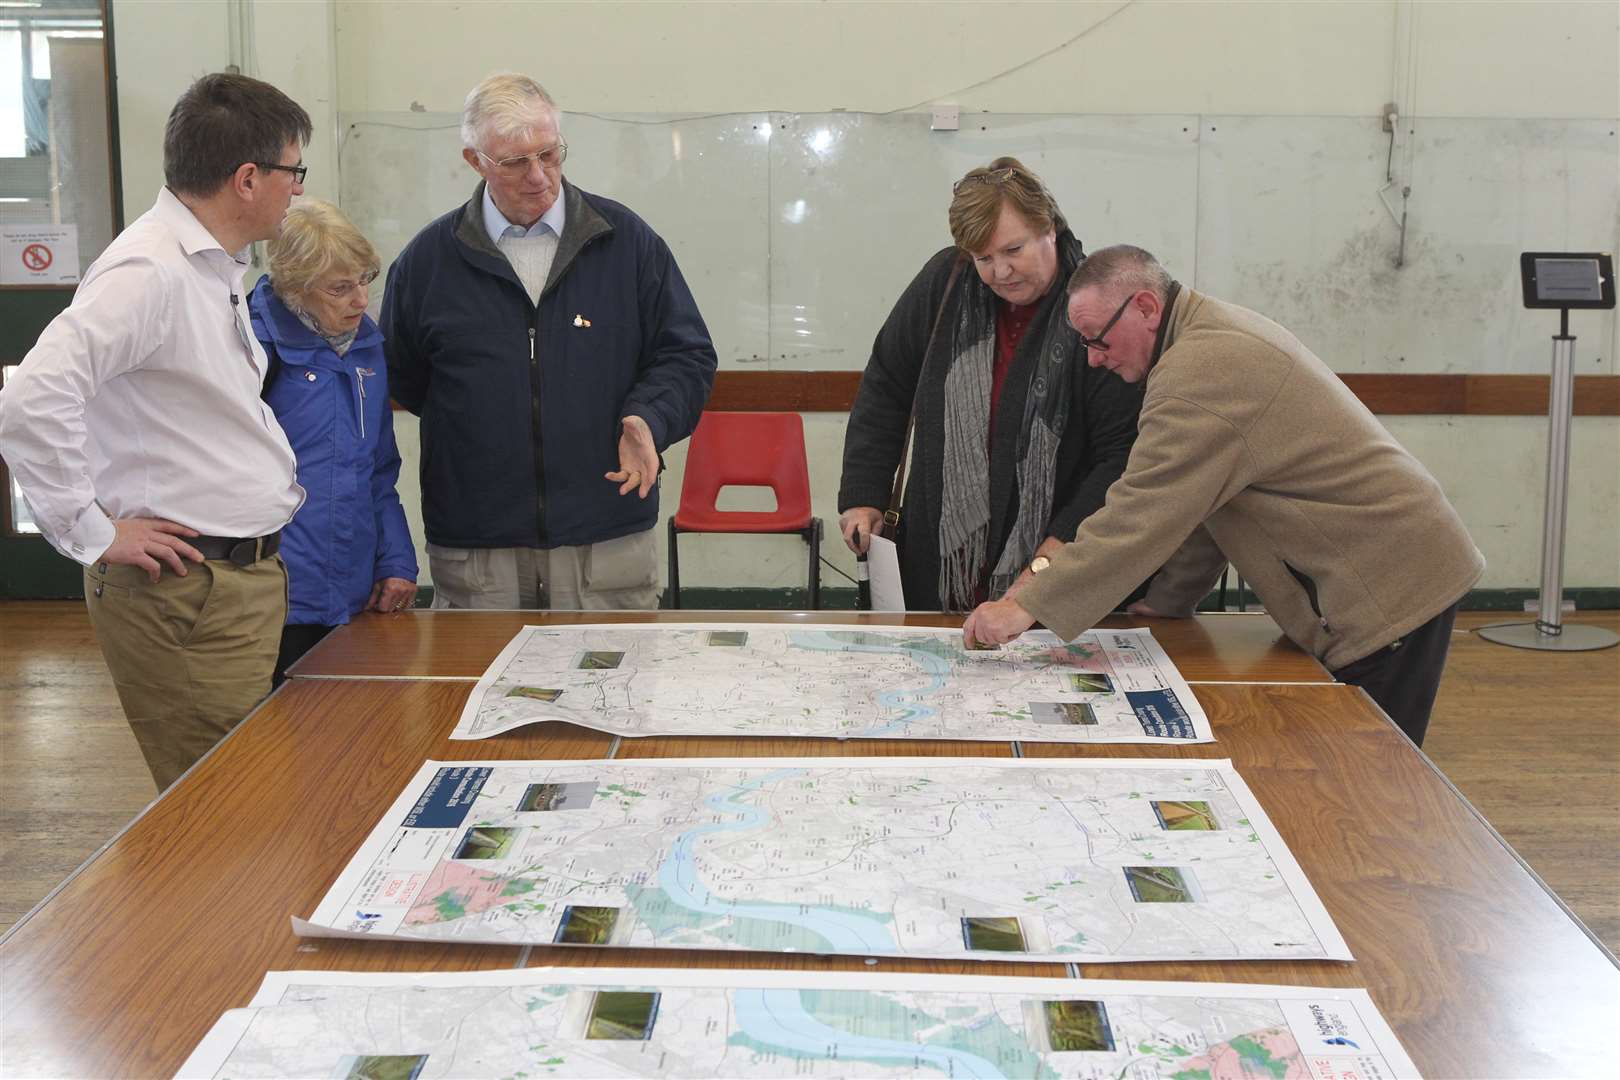 Visitors peruse Lower Thames Crossing plans at a public exhibition at Temple Hill Community Centre in Dartford.